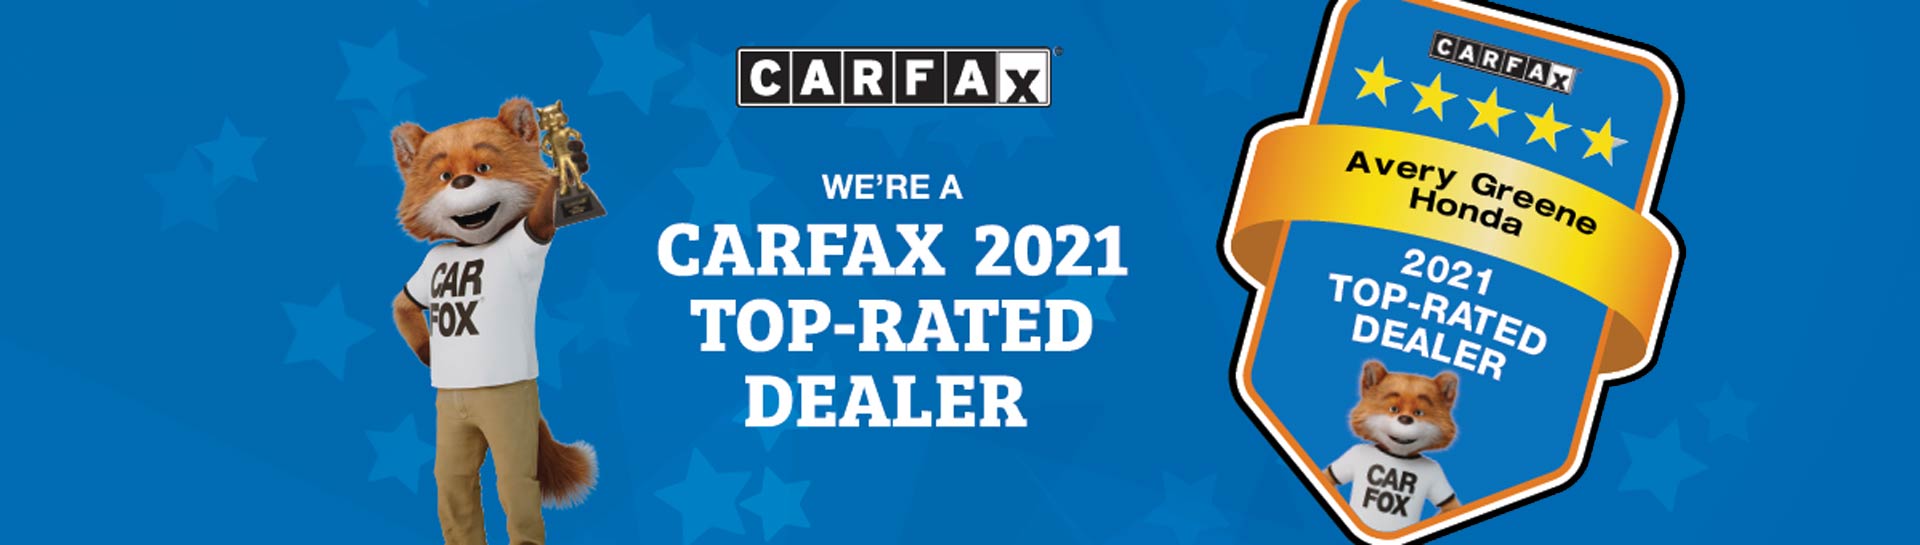 Car Fax 2021 Top Rated Dealer Banner